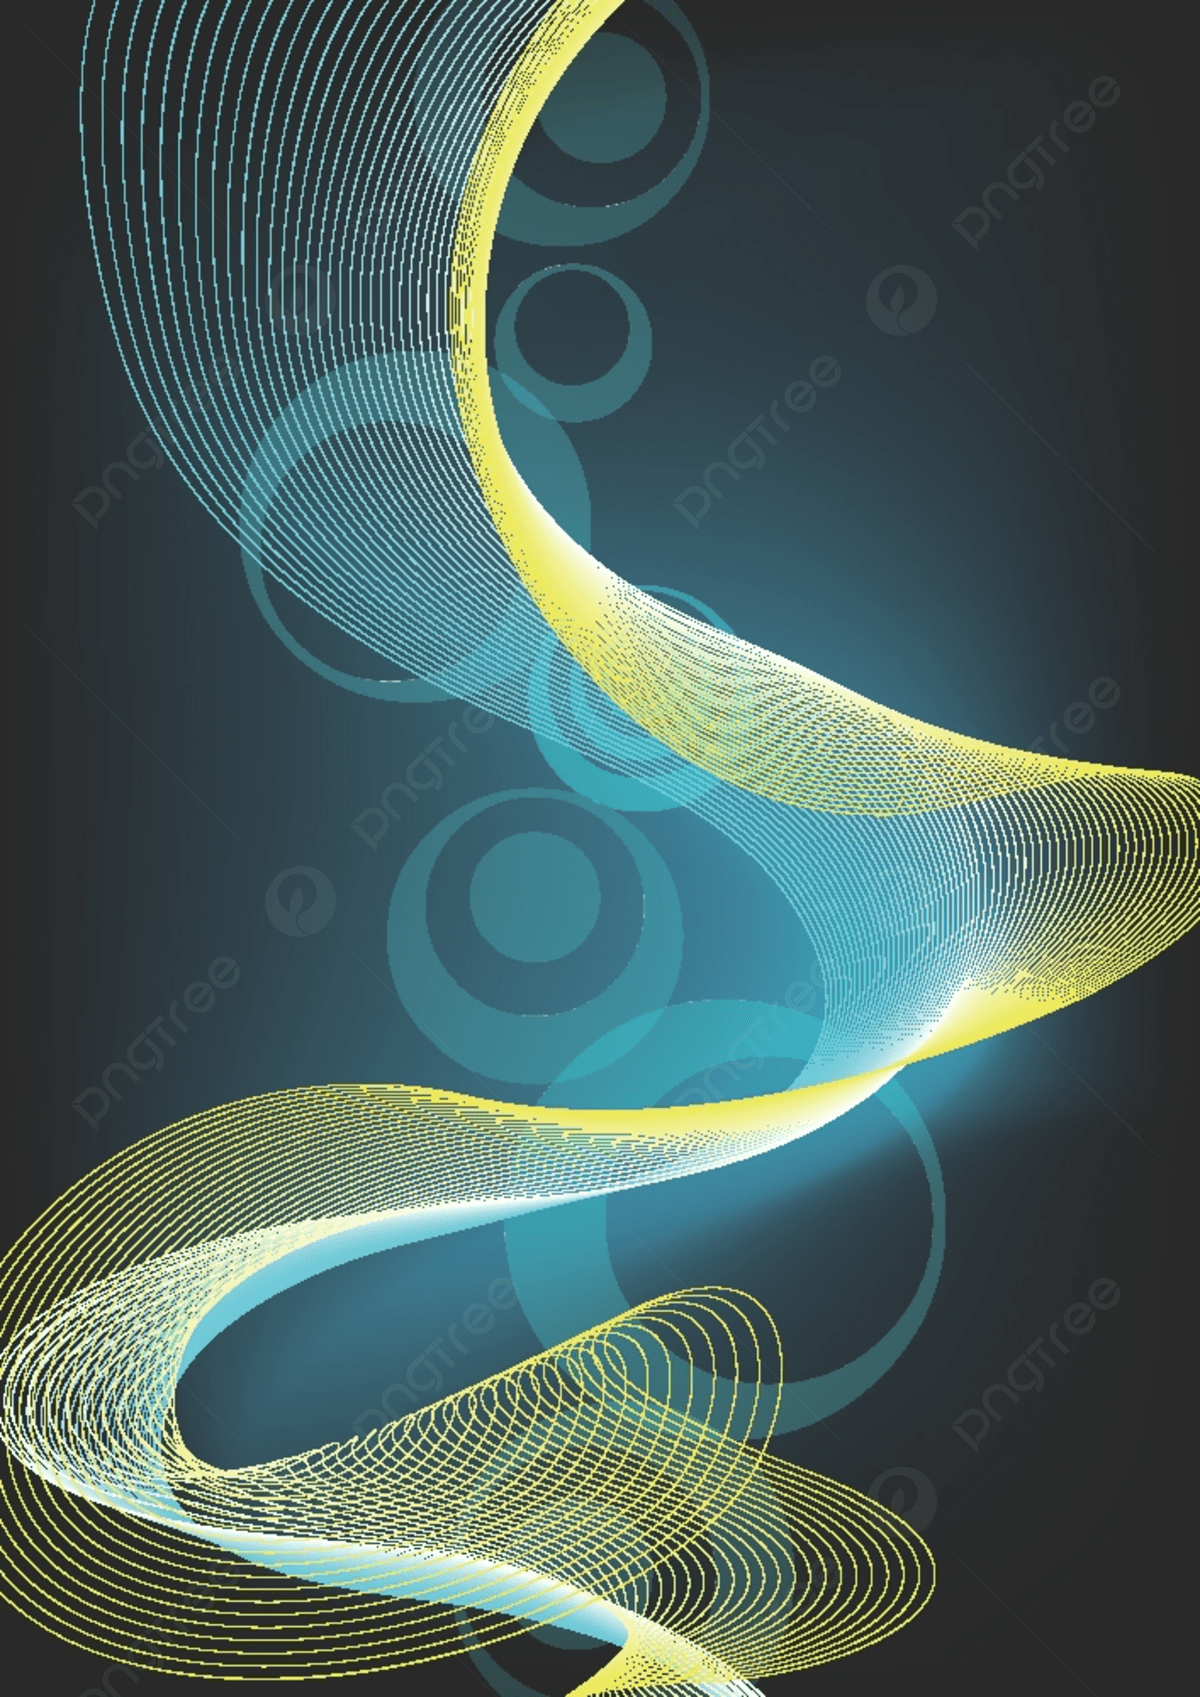 Abstract background with wavy lines and circles on a dark blue background. - Dark green